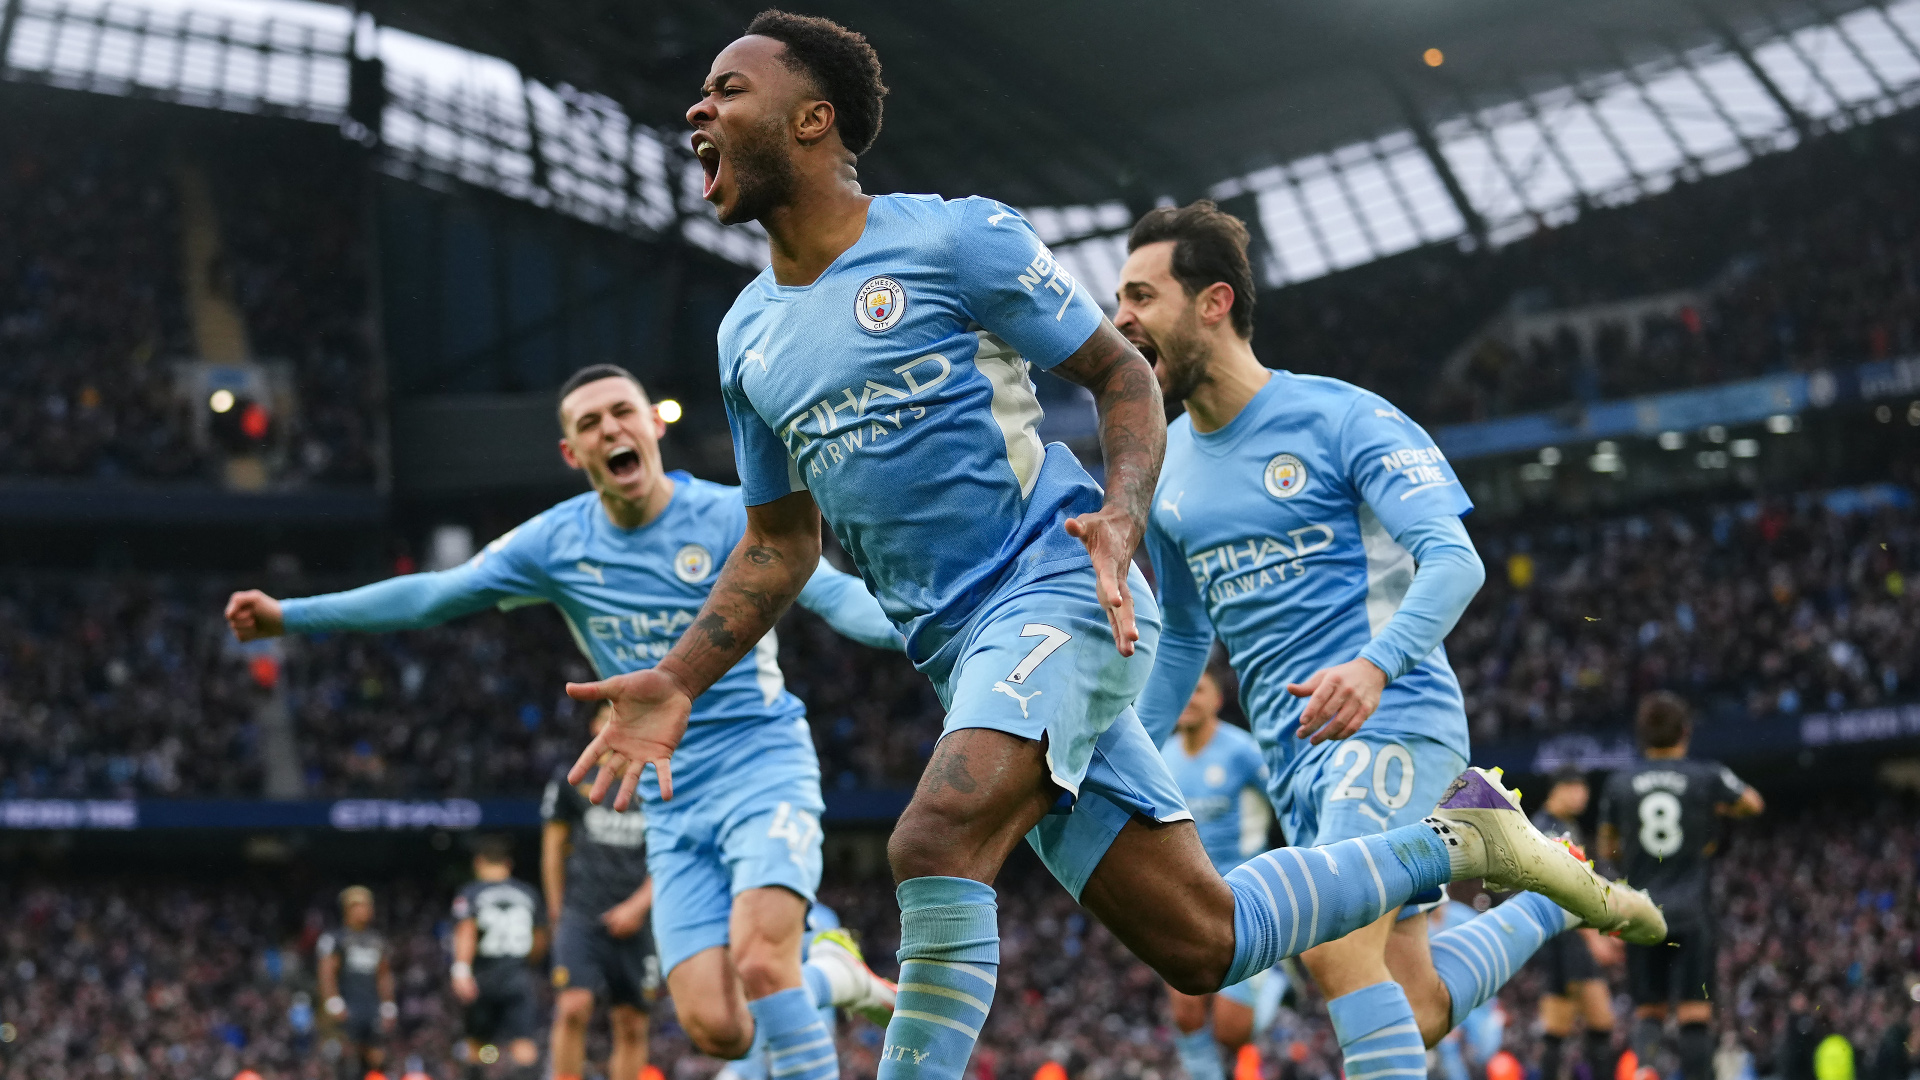 Raheem Sterling and the Manchester City players celebrate